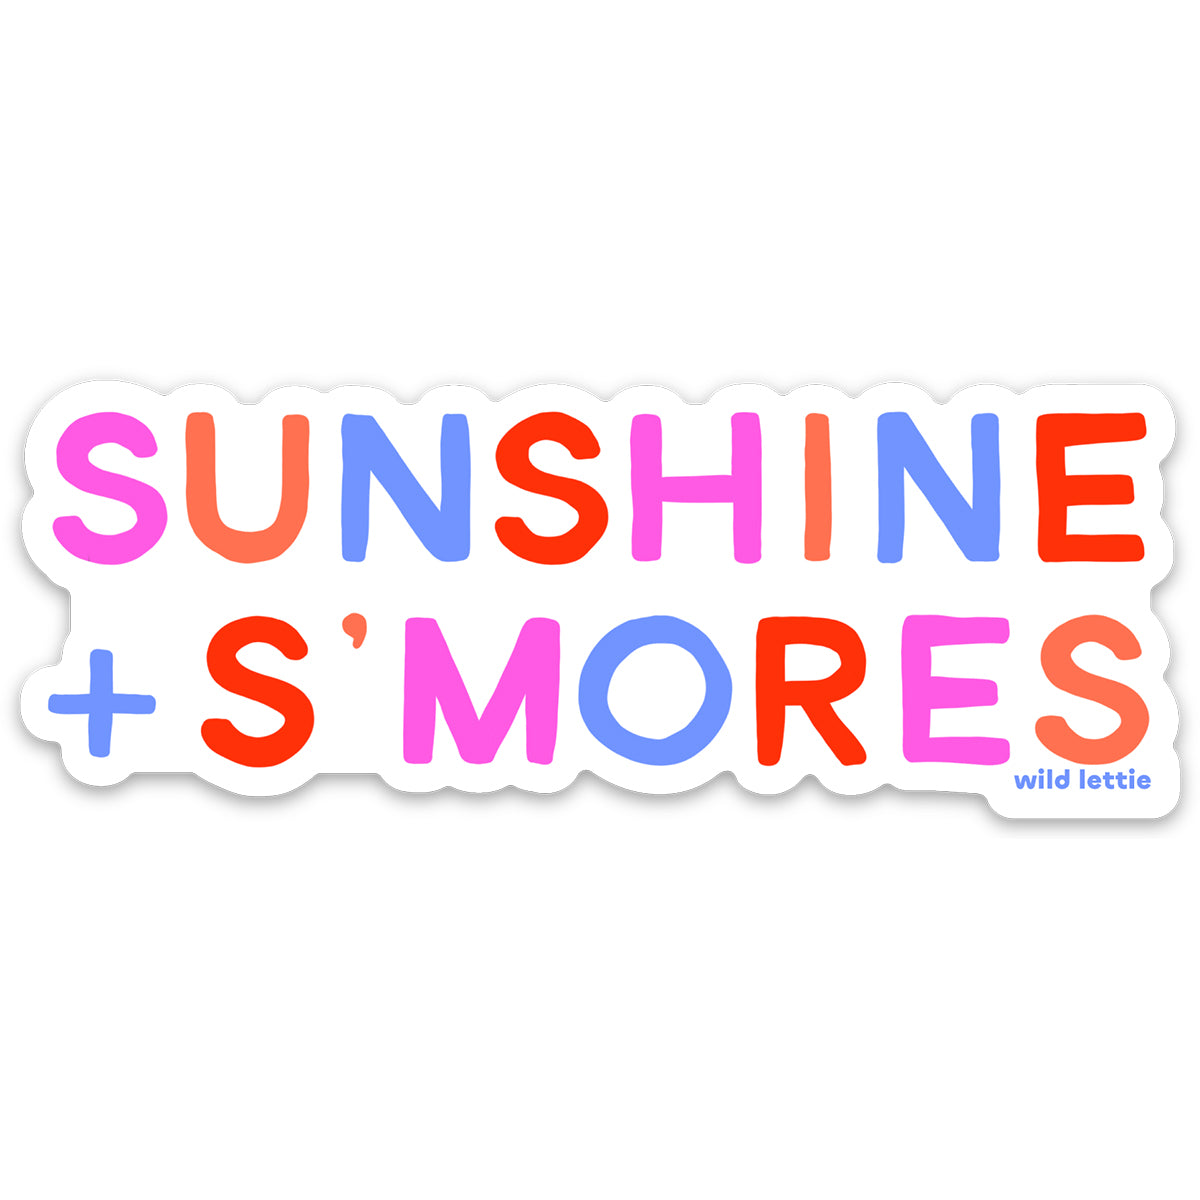 Sunshine and S'mores Sticker